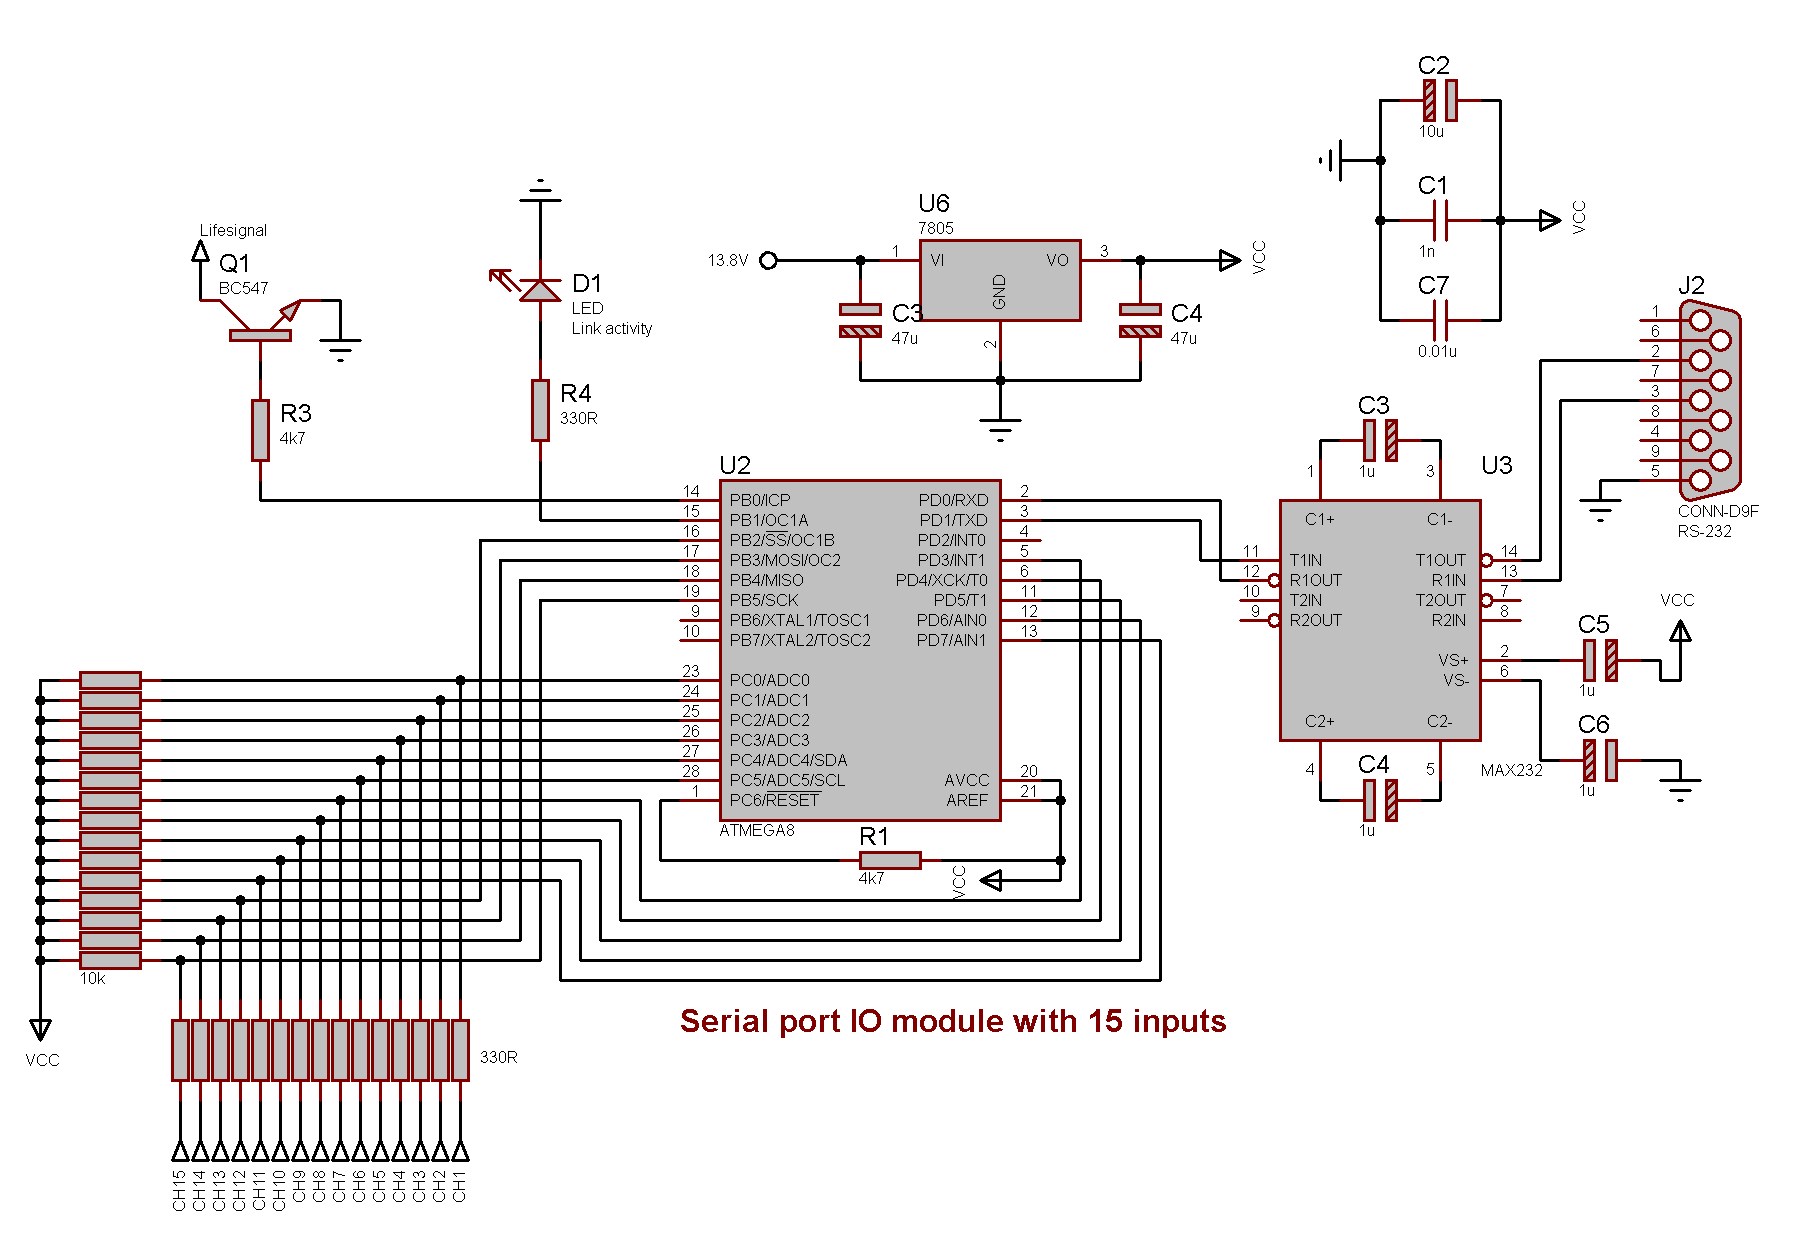 Schematics for the serial interface module